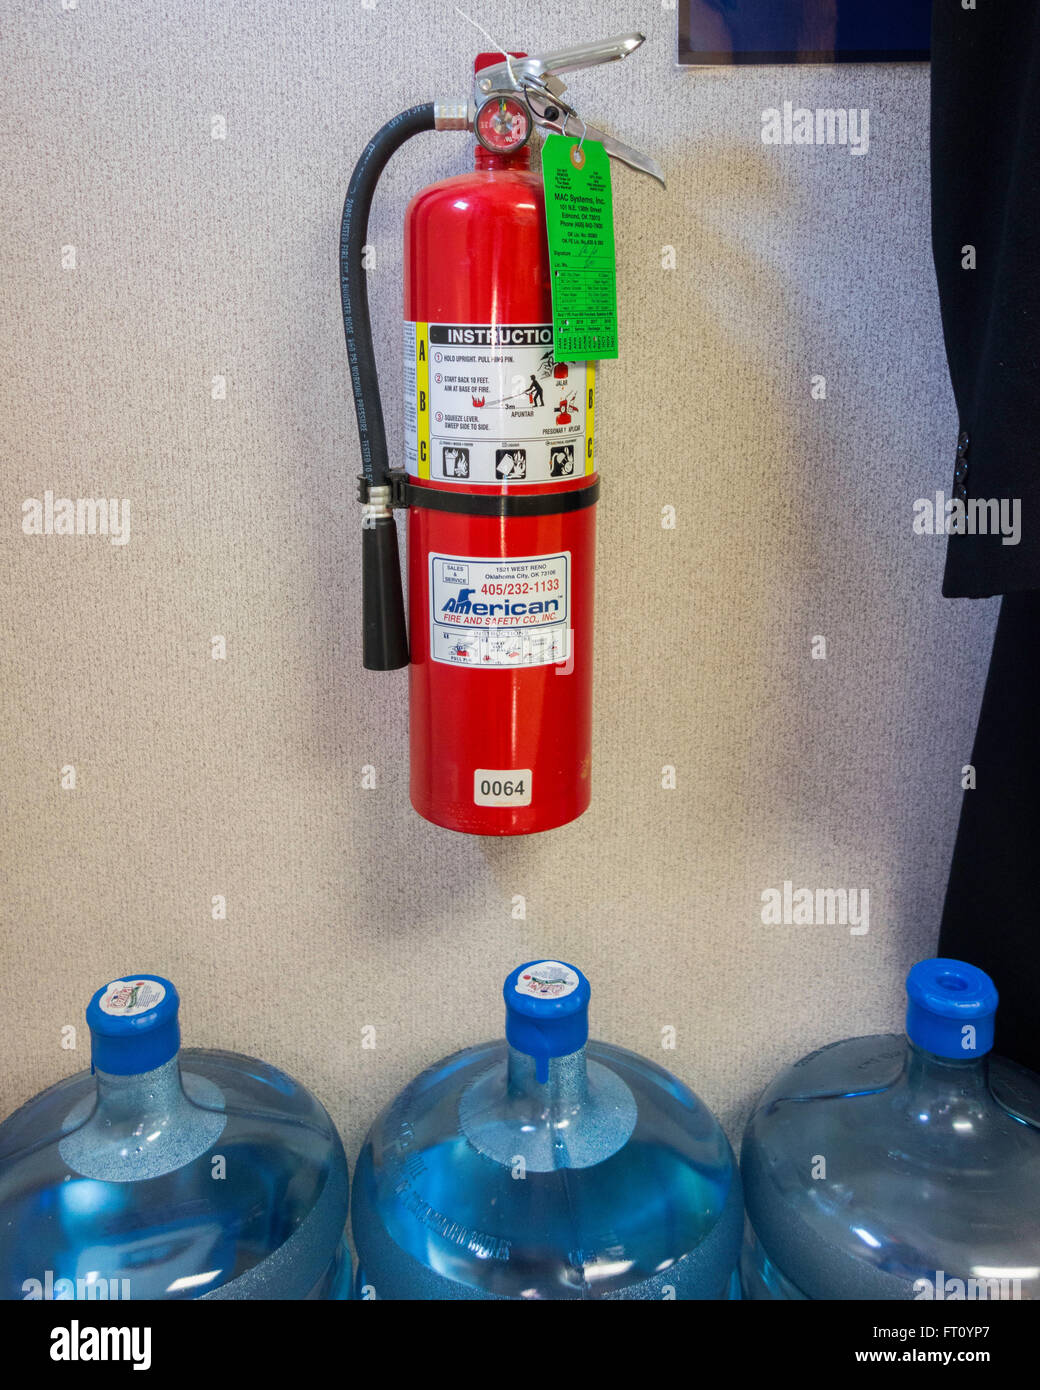 A mandatory fire extinguisher hangs on a wall over 3 five gallon water bottles in a storage area of a business. Oklahoma, USA. Stock Photo